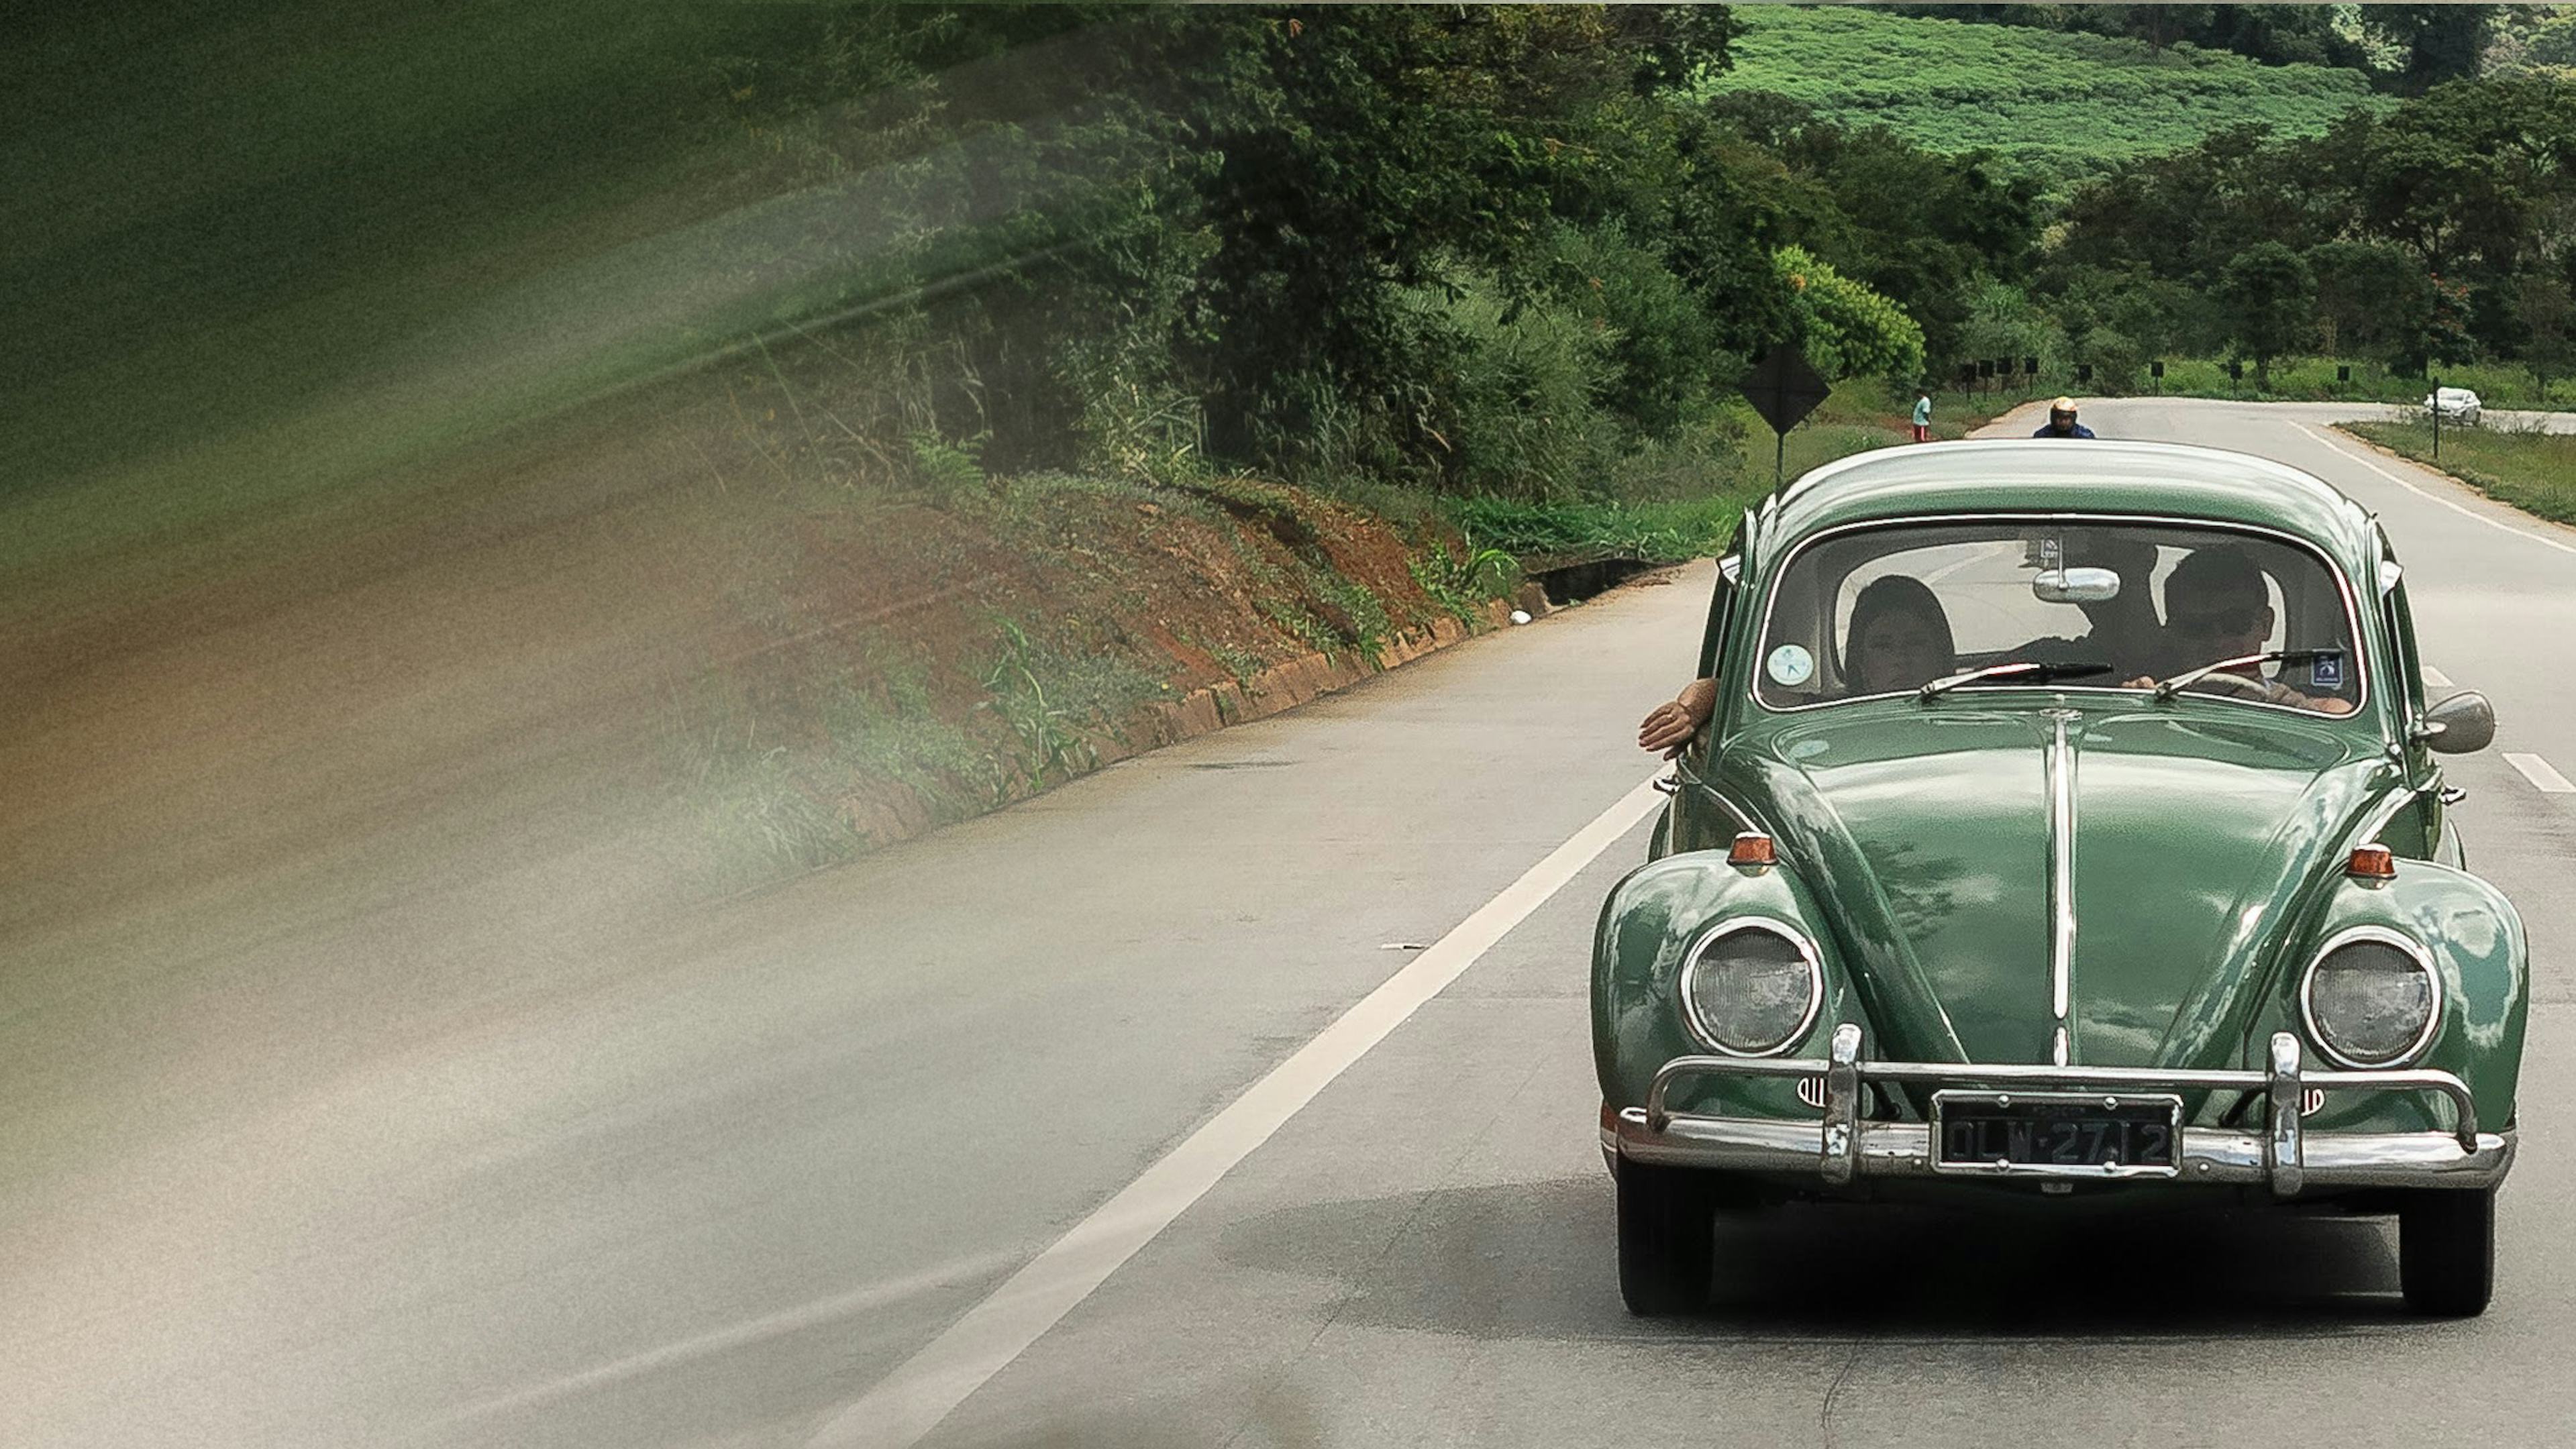 Couple in classic green Volkswagen car driving down a highway with forest in background. Get CAA roadside assistance today for more comprehensive coverage than your manufacturers roadside assistance plan (including honda roadside assistance, hyundai roadside assistance, ford roadside assistance, mazda roadside assistance, nissan roadside assistance)